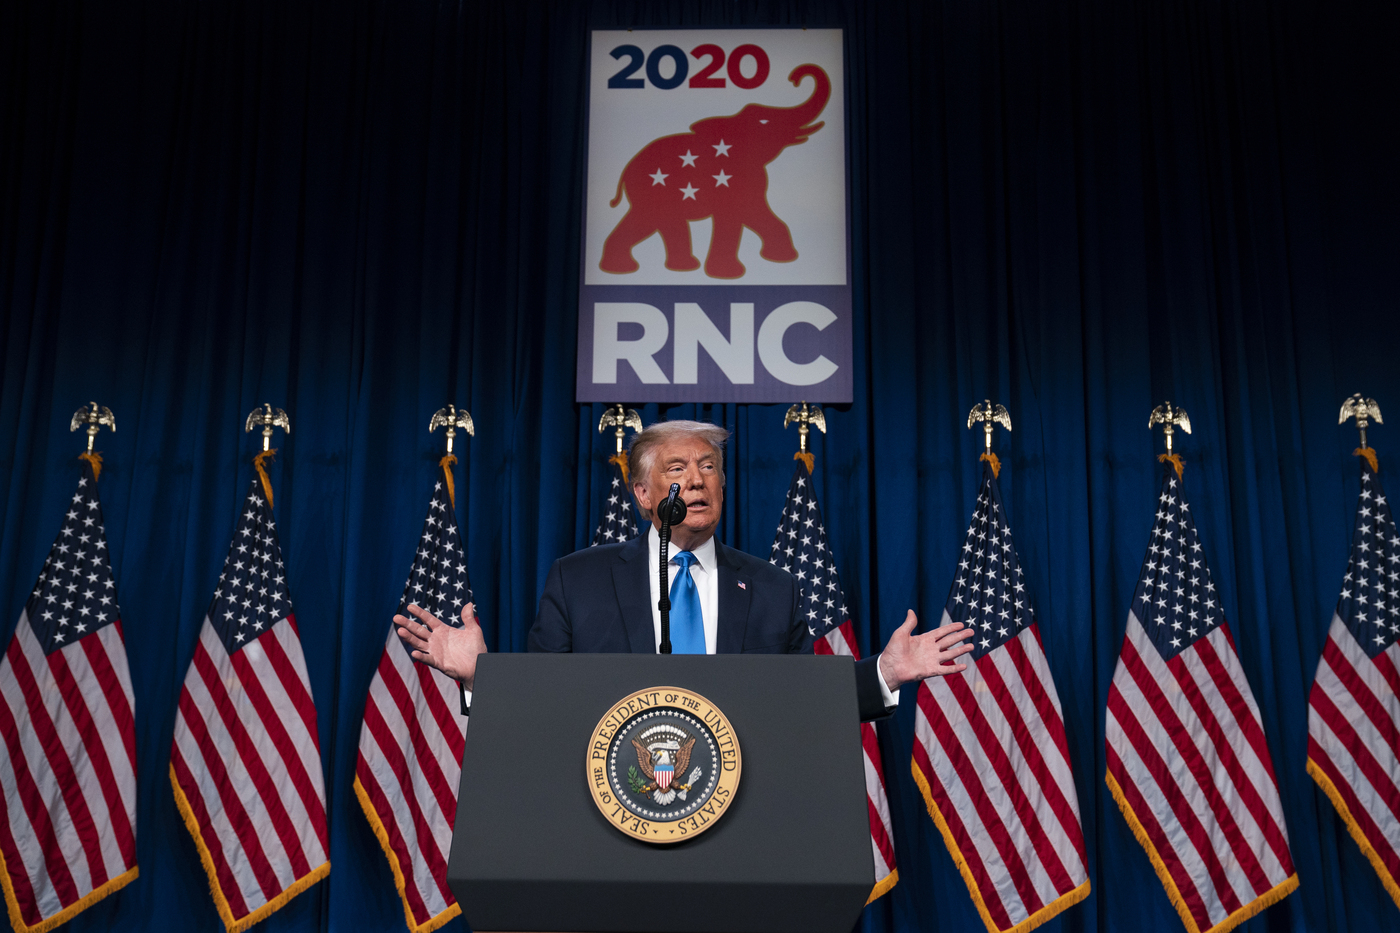 President Donald Trump speaks at the Republican National Committee convention, Monday, Aug. 24, 2020, in Charlotte. (AP Photo/Evan Vucci)